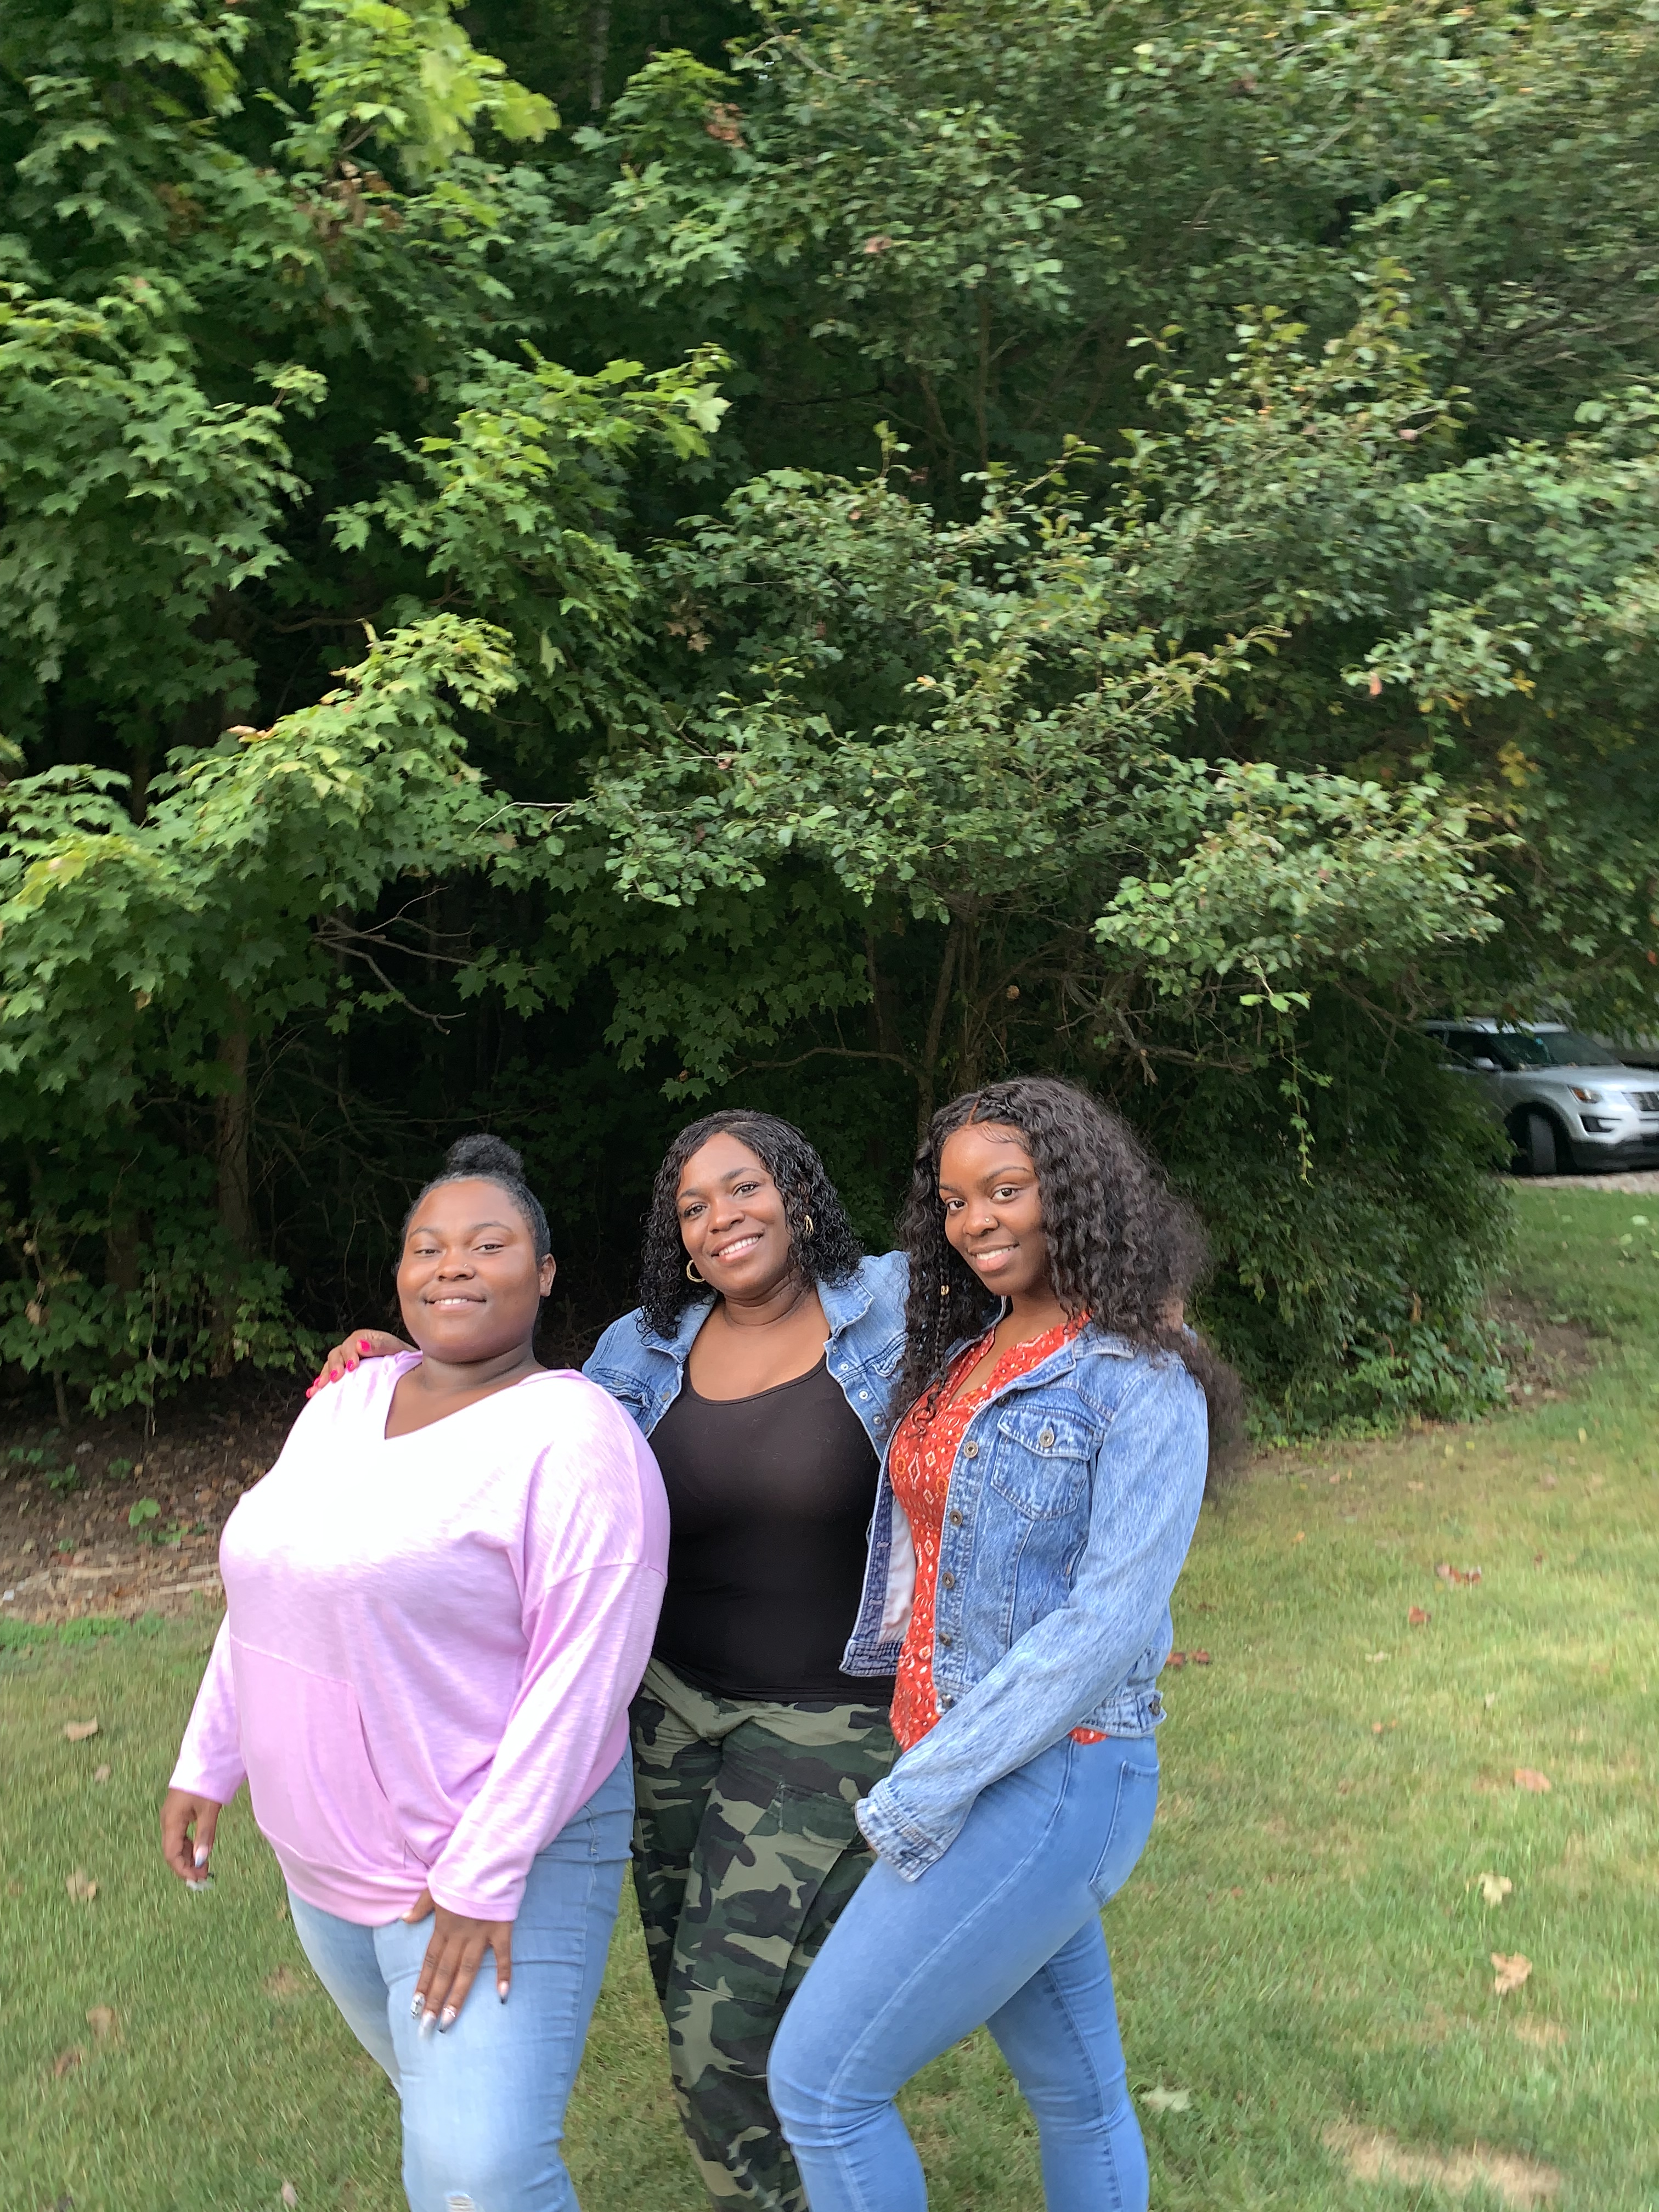 Kelley Williams-Bolar (center), pictured with her daughters Kayla (left) and Jada (right). (Courtesy of Kelley Williams-Bolar)